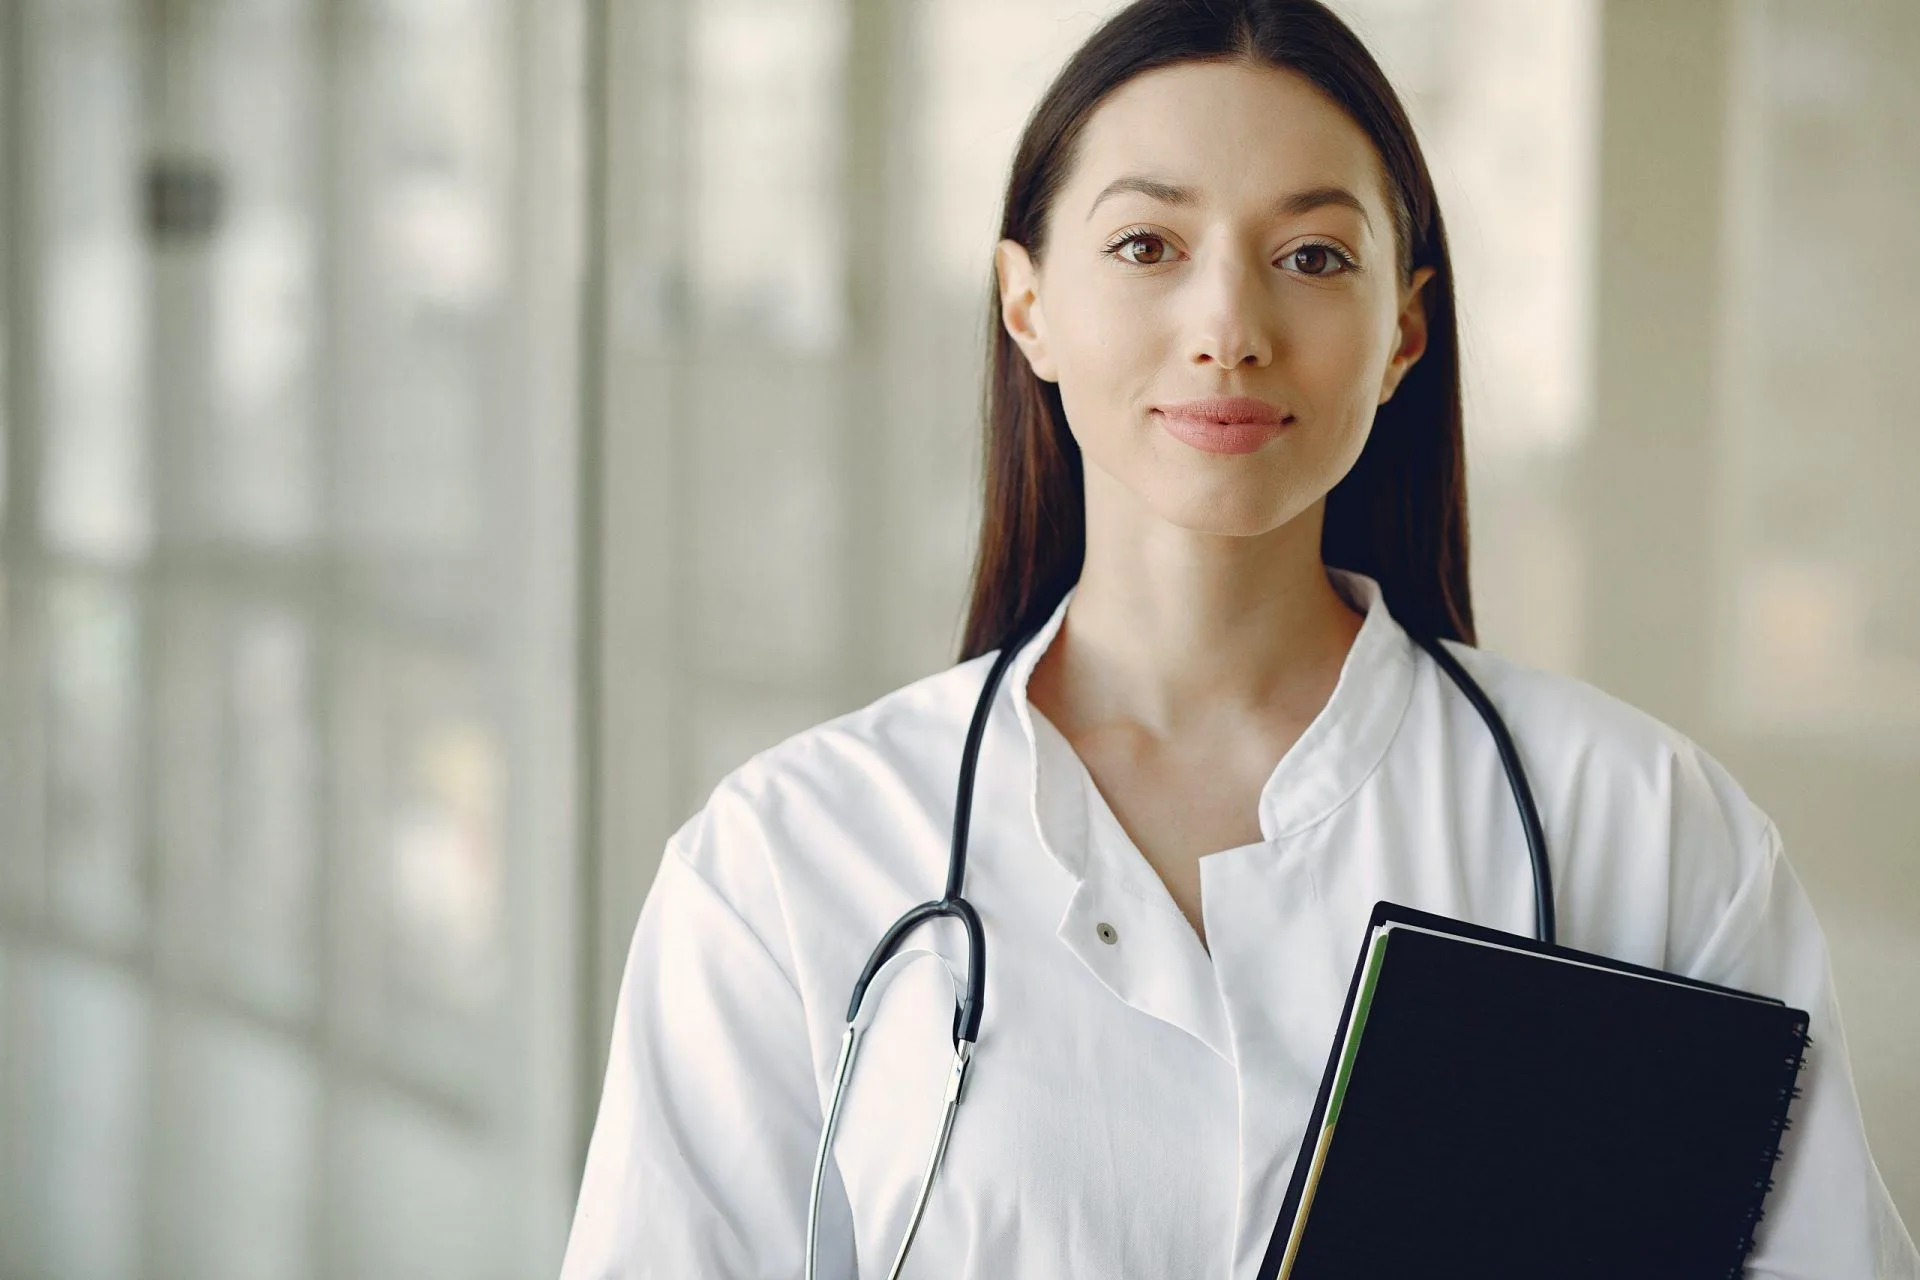 Why Facilities Should Use Medical Staffing Agencies